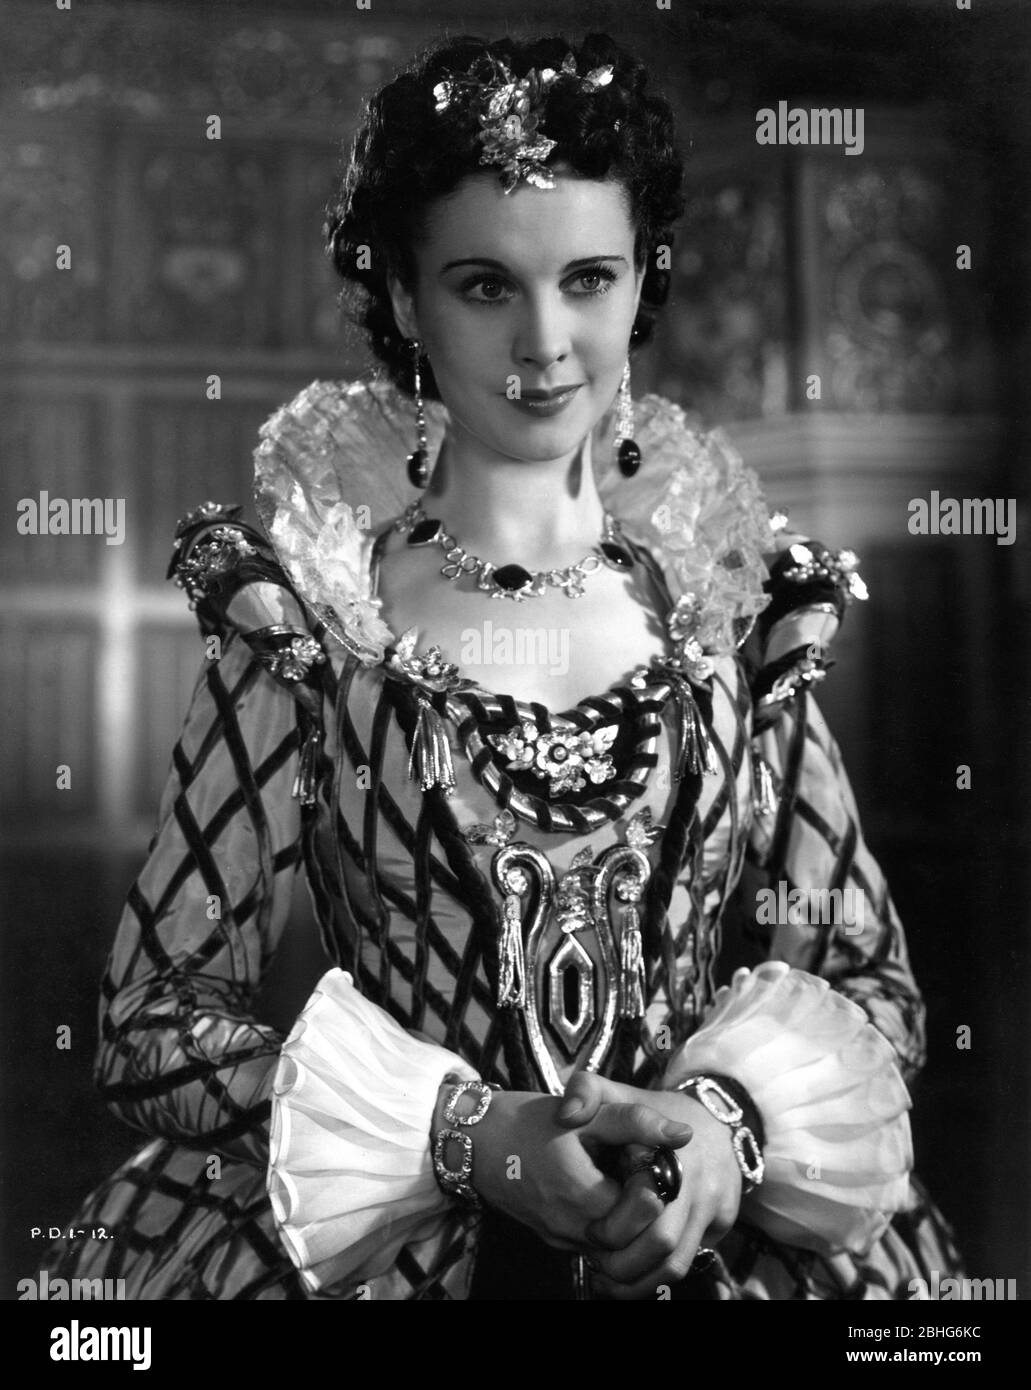 VIVIEN LEIGH Portrait as Cynthia Lady-in Waiting to Queen Elizabeth I in FIRE OVER ENGLAND 1937 director WILLIAM K. HOWARD novel A.E.W. Mason screenplay Clemence Dane and Sergei Nolbandov music Richard Addinsell producers Erich Pommer and Alexander Korda  London Film Productions / United Artists Stock Photo